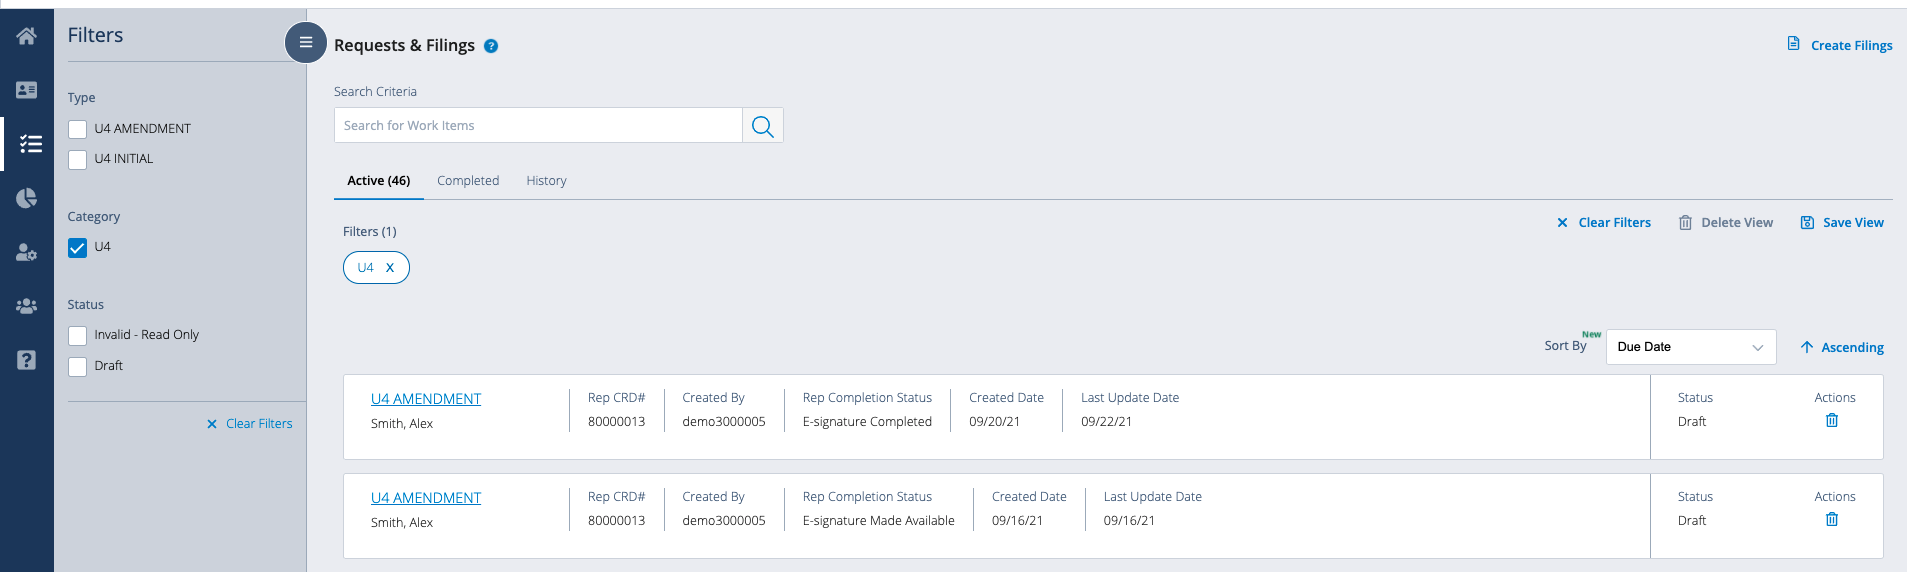 Firm Settings Guide: Signature Status on FINRA Gateways Request and Filings Screen